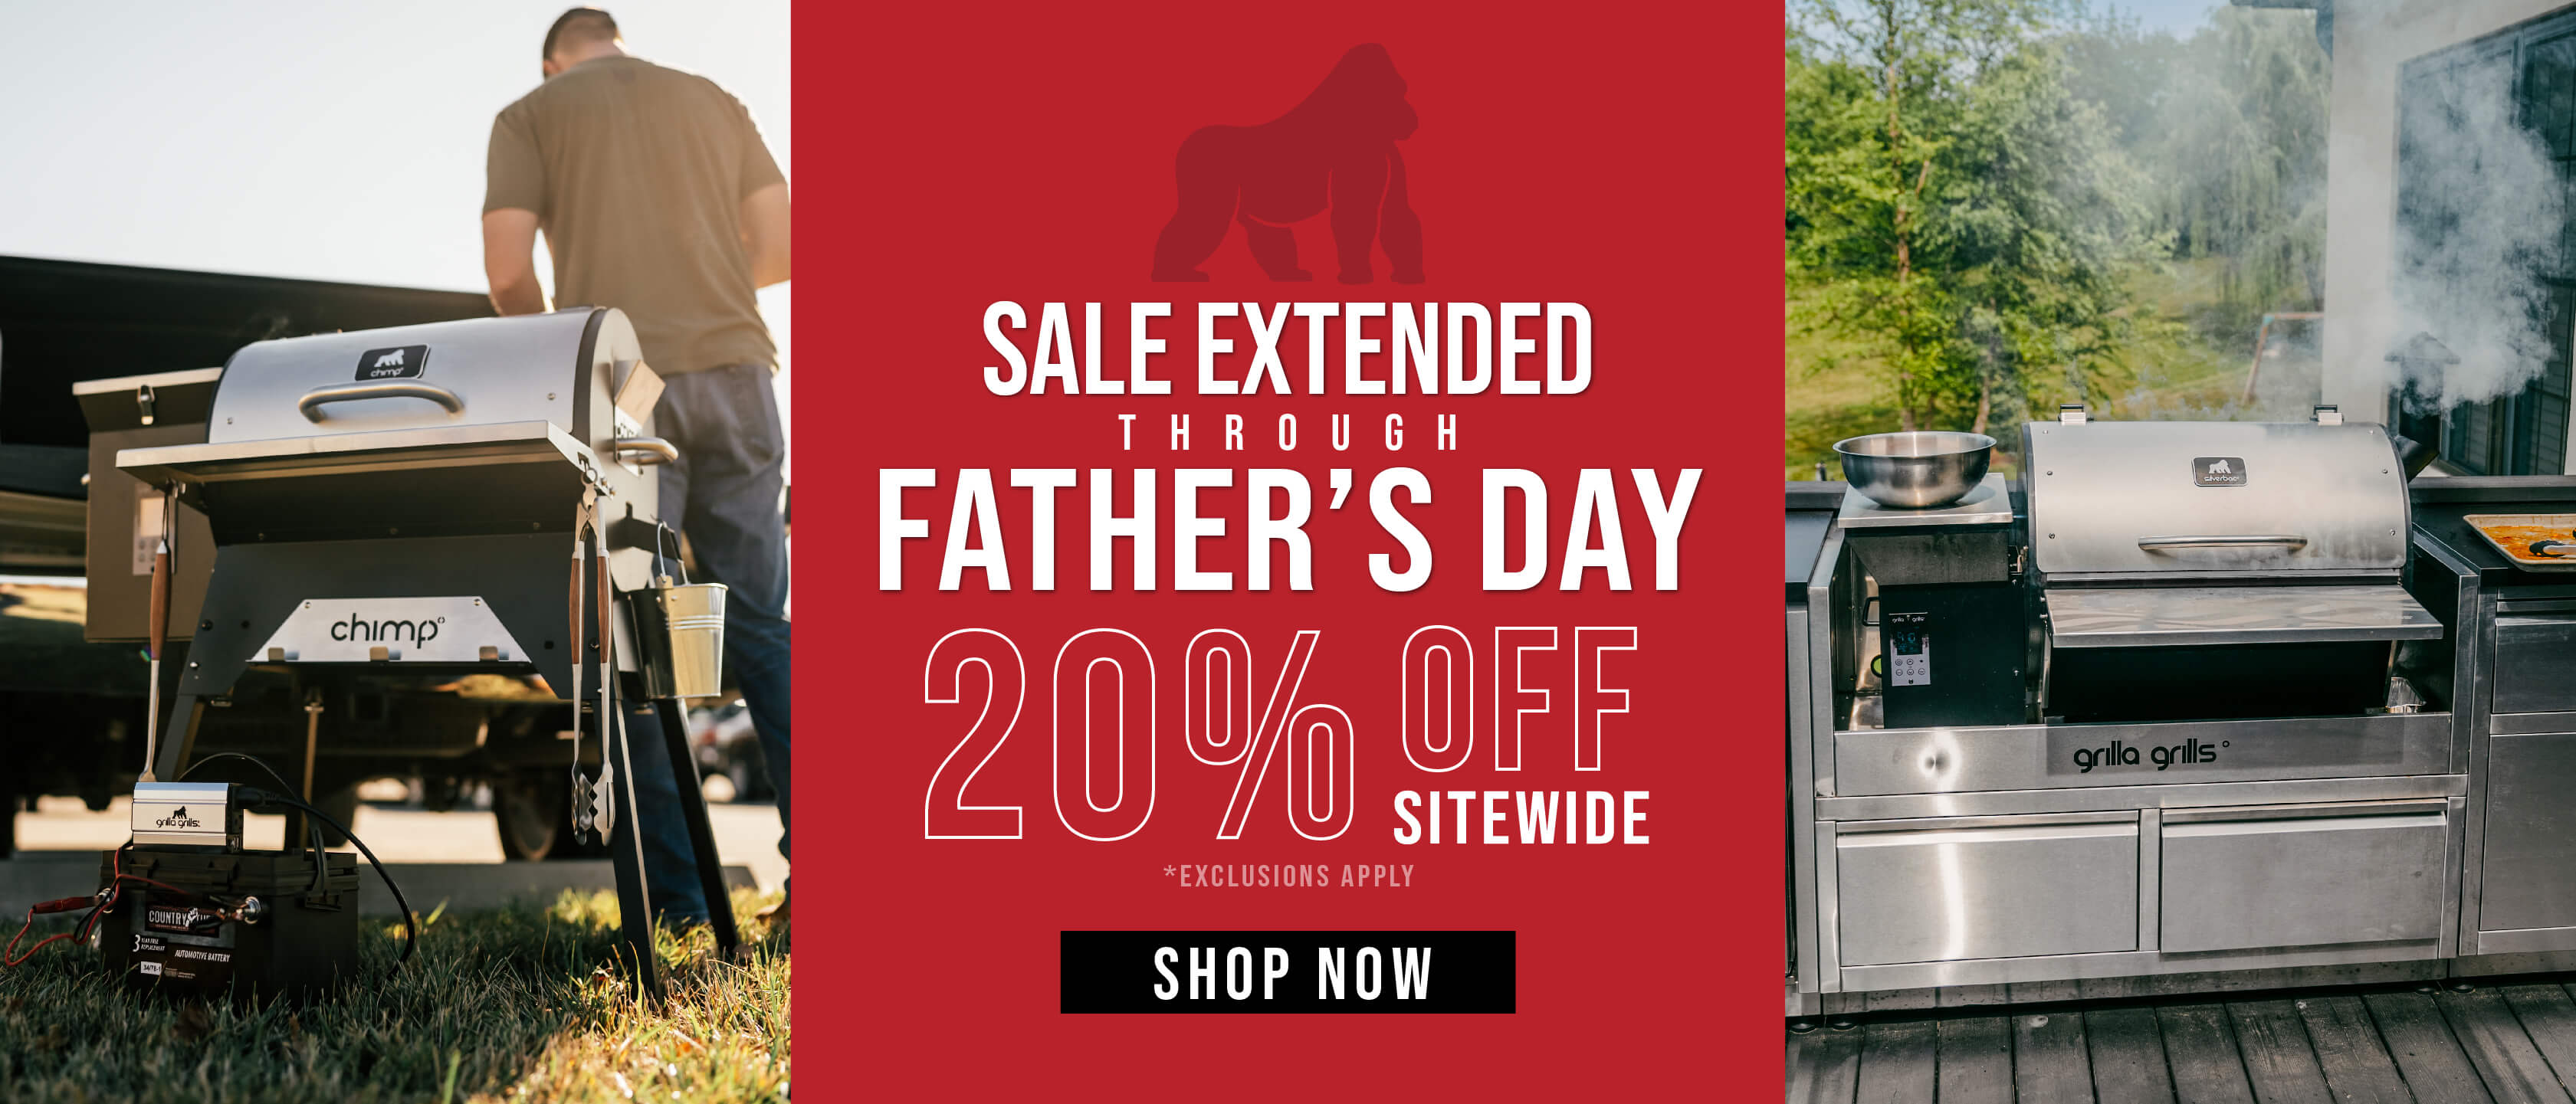 Sale Extended through Father's Day 20% off Sitewide! Shop Now